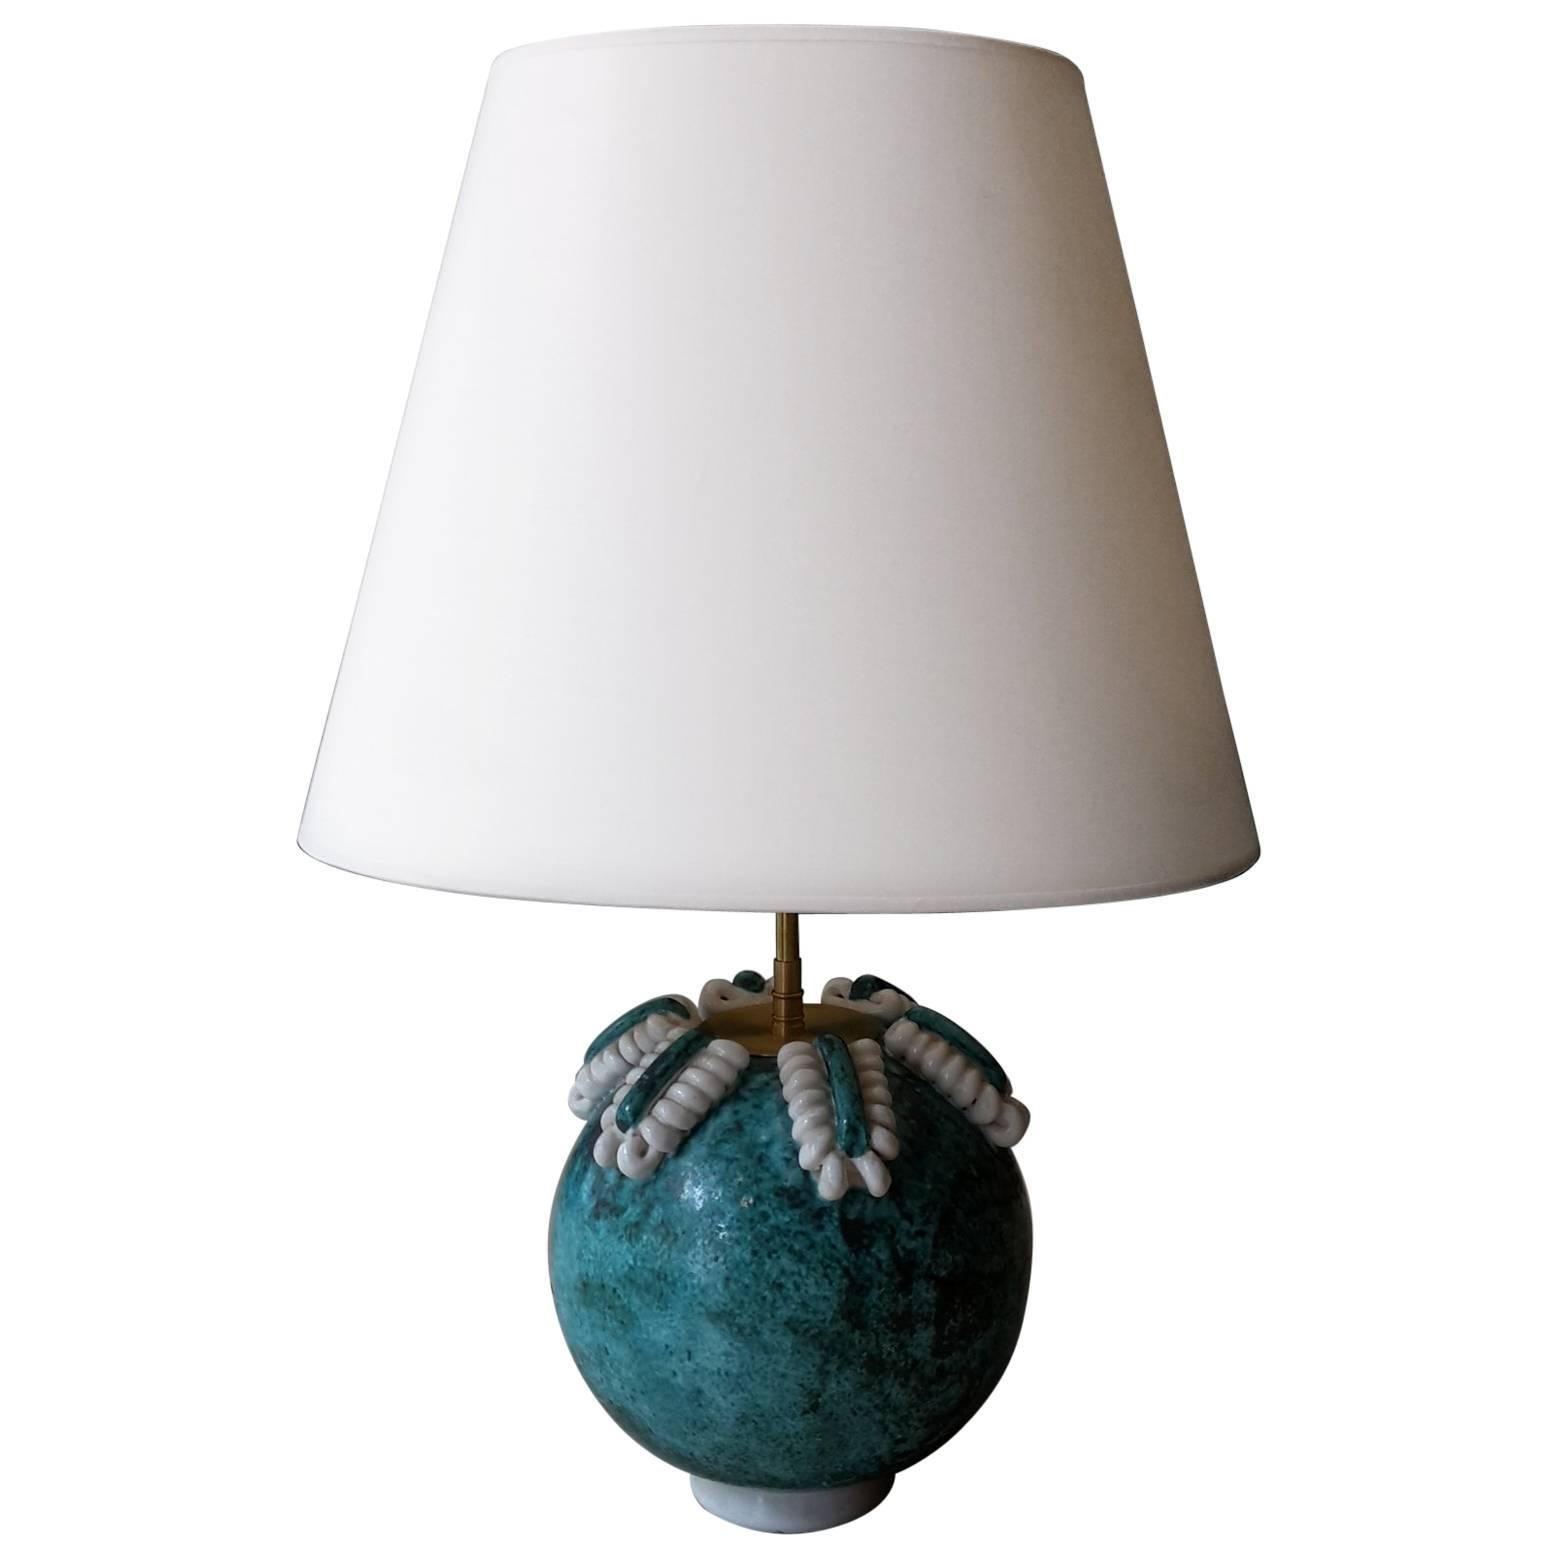 Early 20th Century Art Deco Table Lamp Made of Turquoise and White Ceramic For Sale